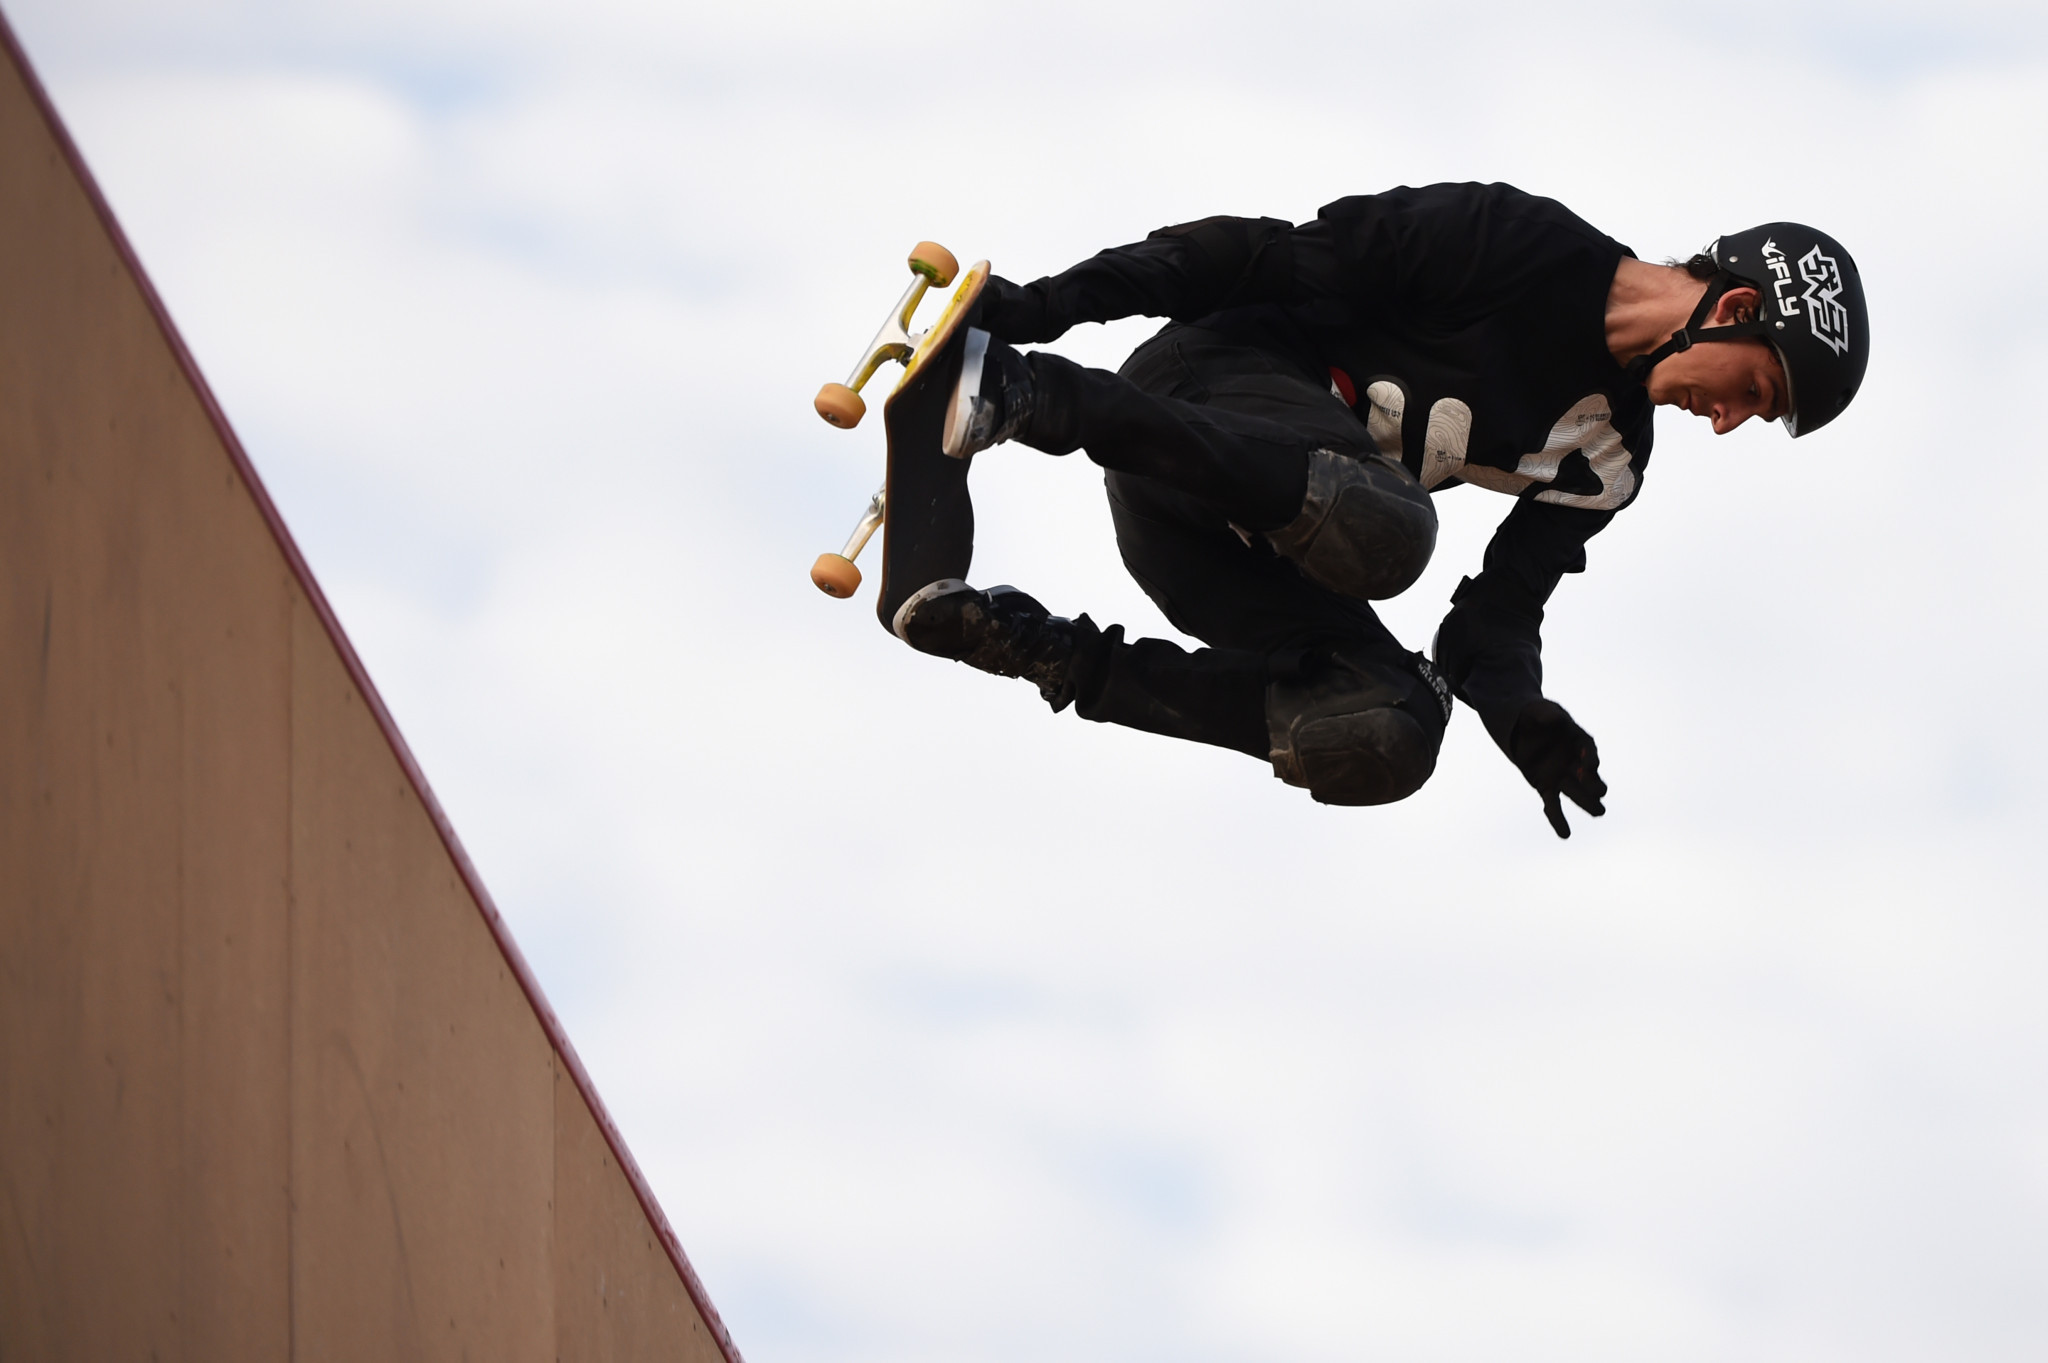 Mitchie Brusco of the United States beat Gui Khury of Brazil to win the vert ramp gold in Chiba ©Getty Images